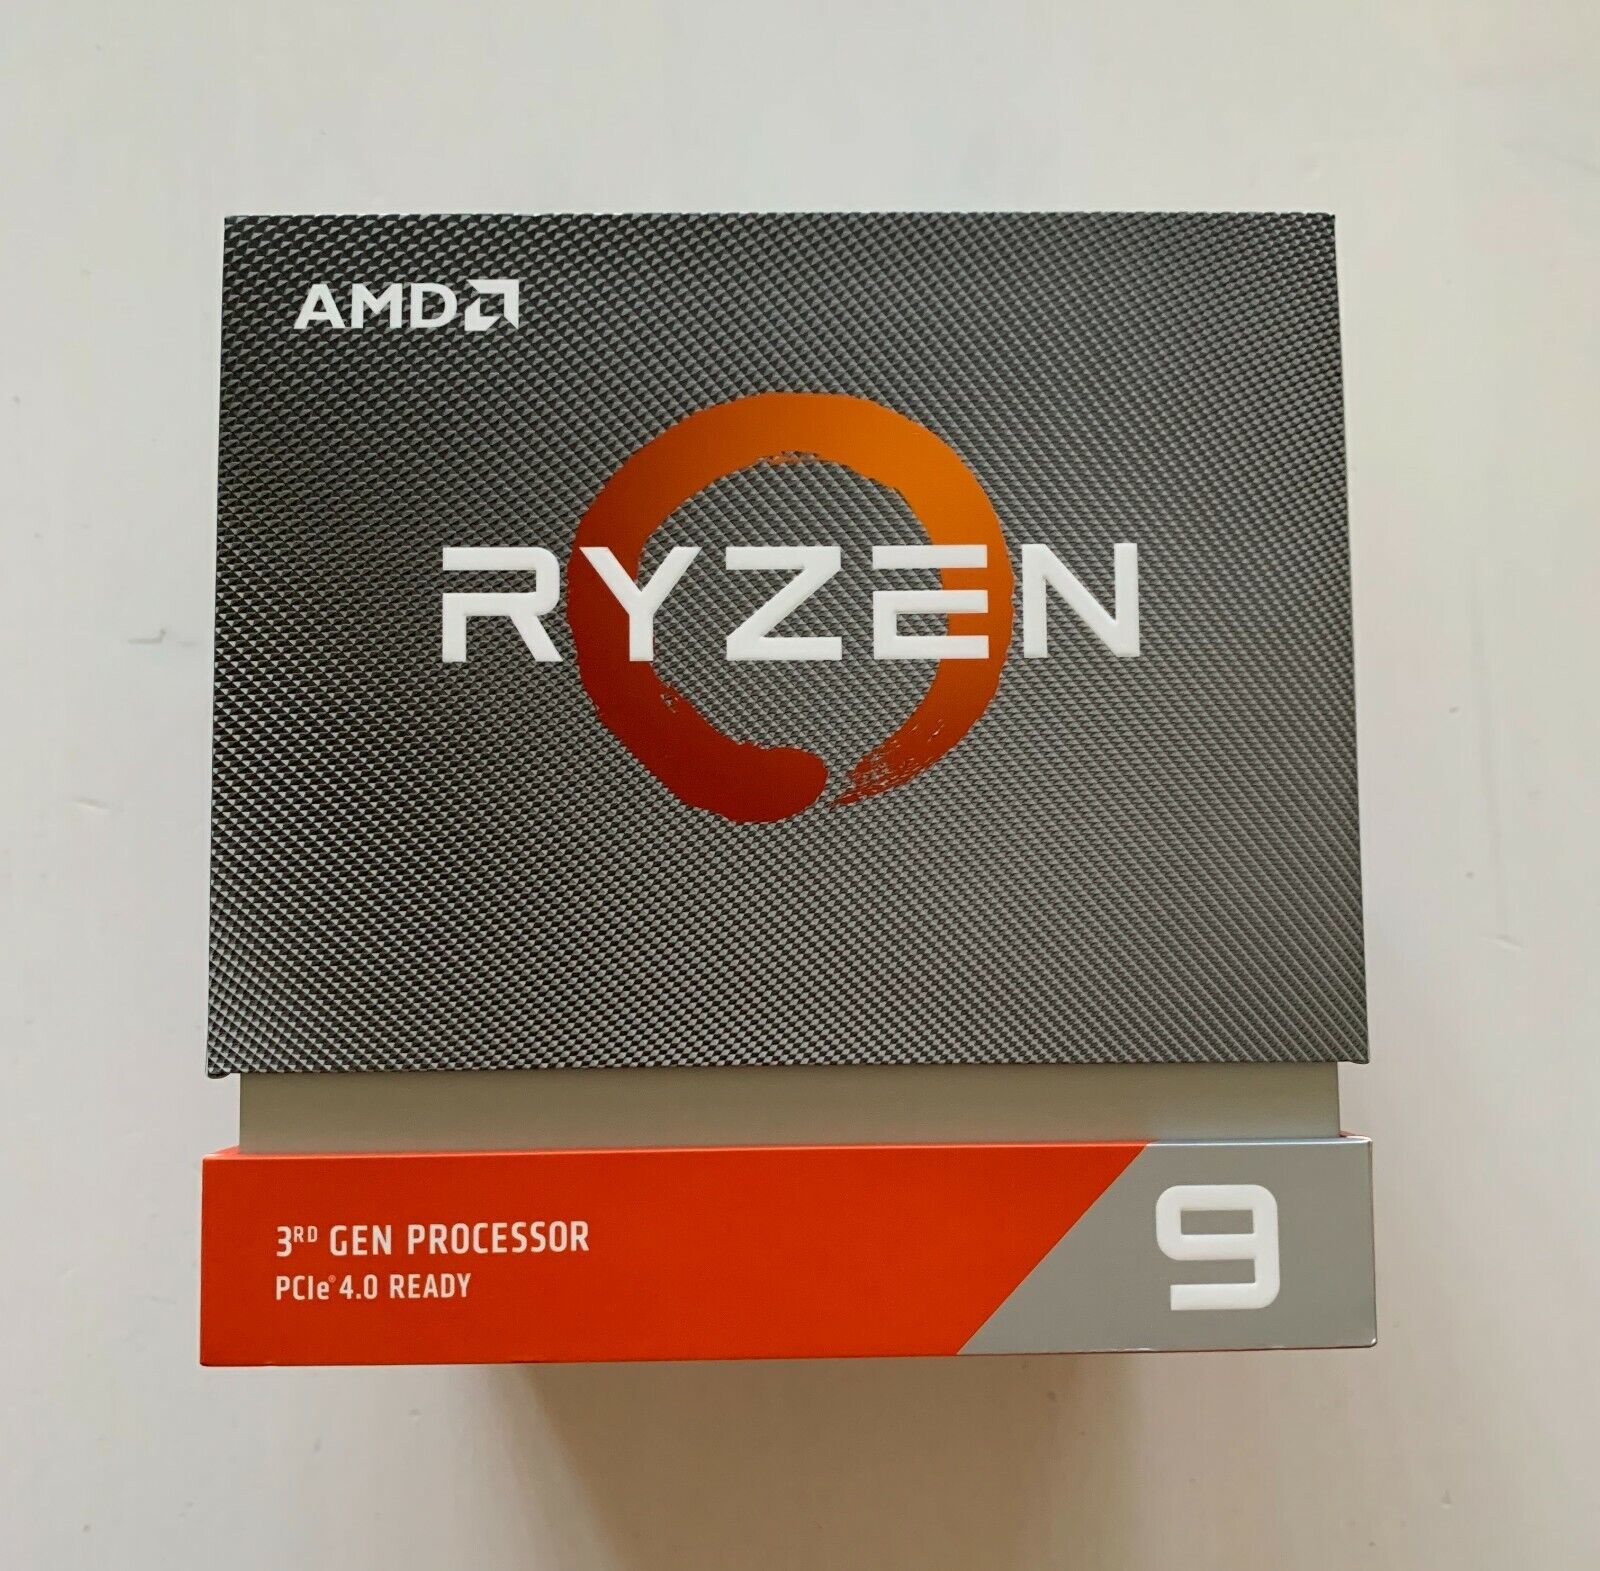 *New* AMD Ryzen 3900x 3.8Ghz 12 Core AM4 Processor with Wraith Prism Cooler